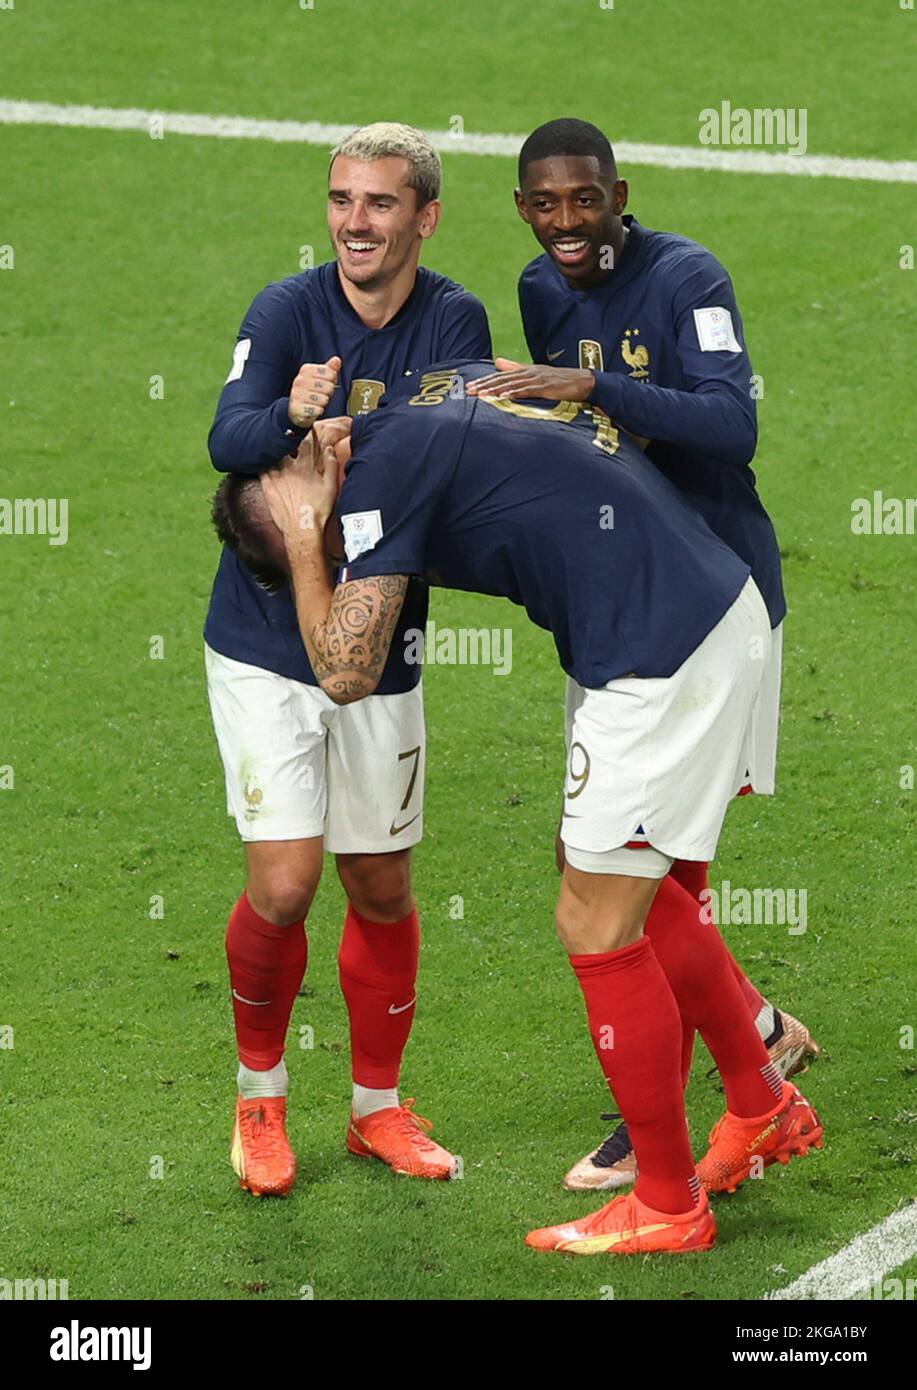 Al Wakrah, Qatar. 22nd Nov, 2022. Players of France celebrate their goal during the Group D match between France and Australia of the 2022 FIFA World Cup at Al Janoub Stadium in Al Wakrah, Qatar, Nov. 22, 2022. Credit: Pan Yulong/Xinhua/Alamy Live News Stock Photo